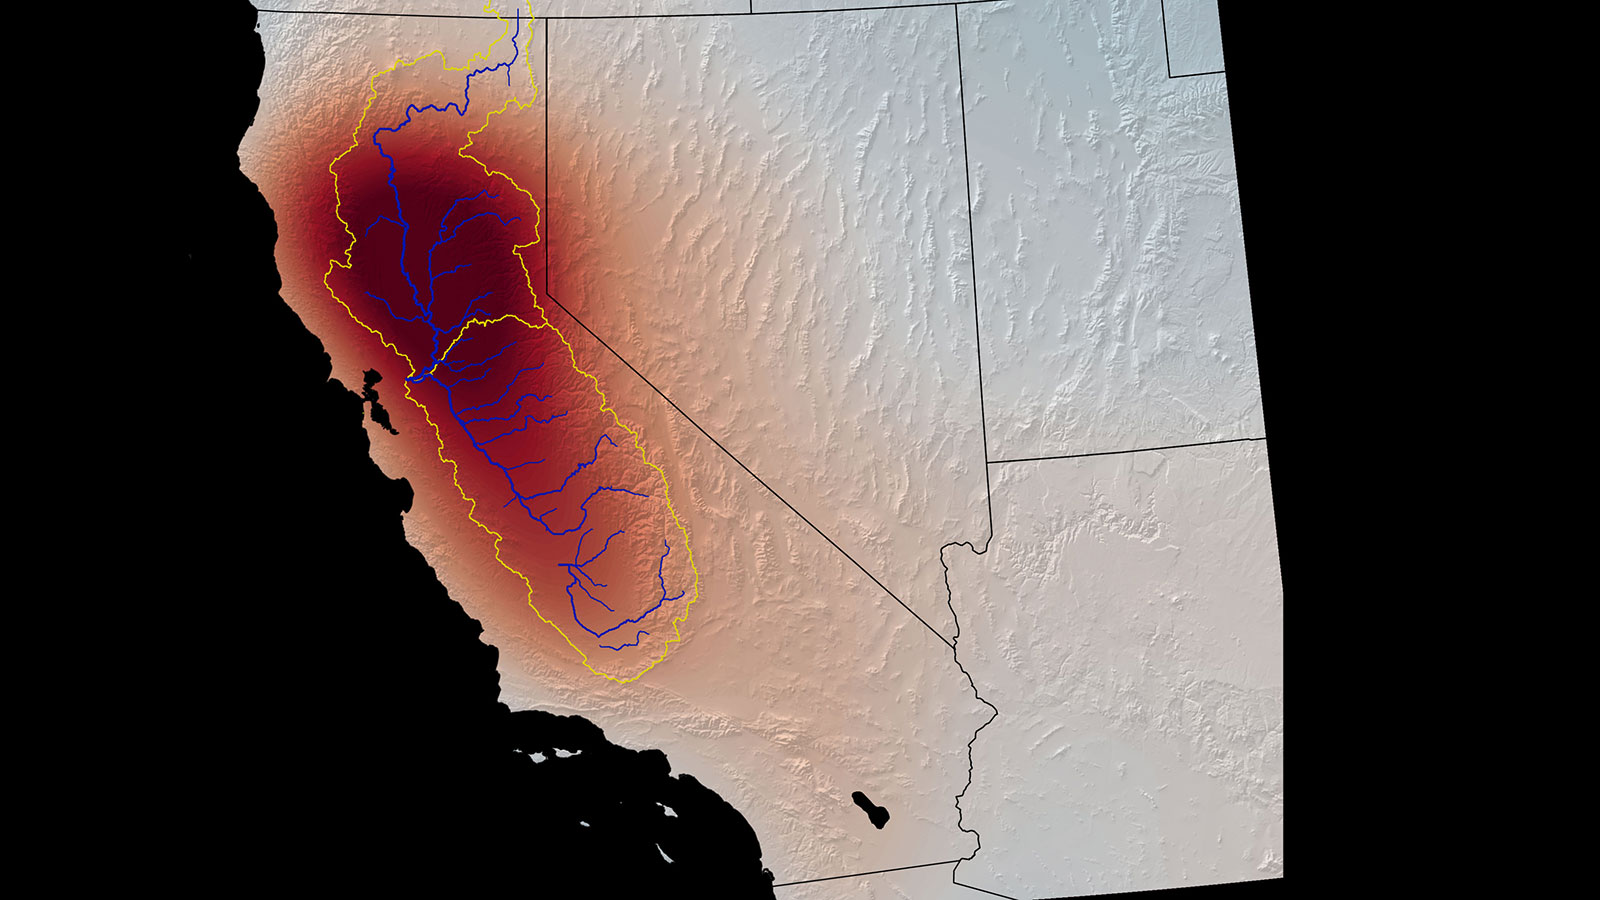 This map shows changes in the mass of water, both above ground and underground, in California from 2003 to 2013, as measured by NASA’s GRACE satellite.